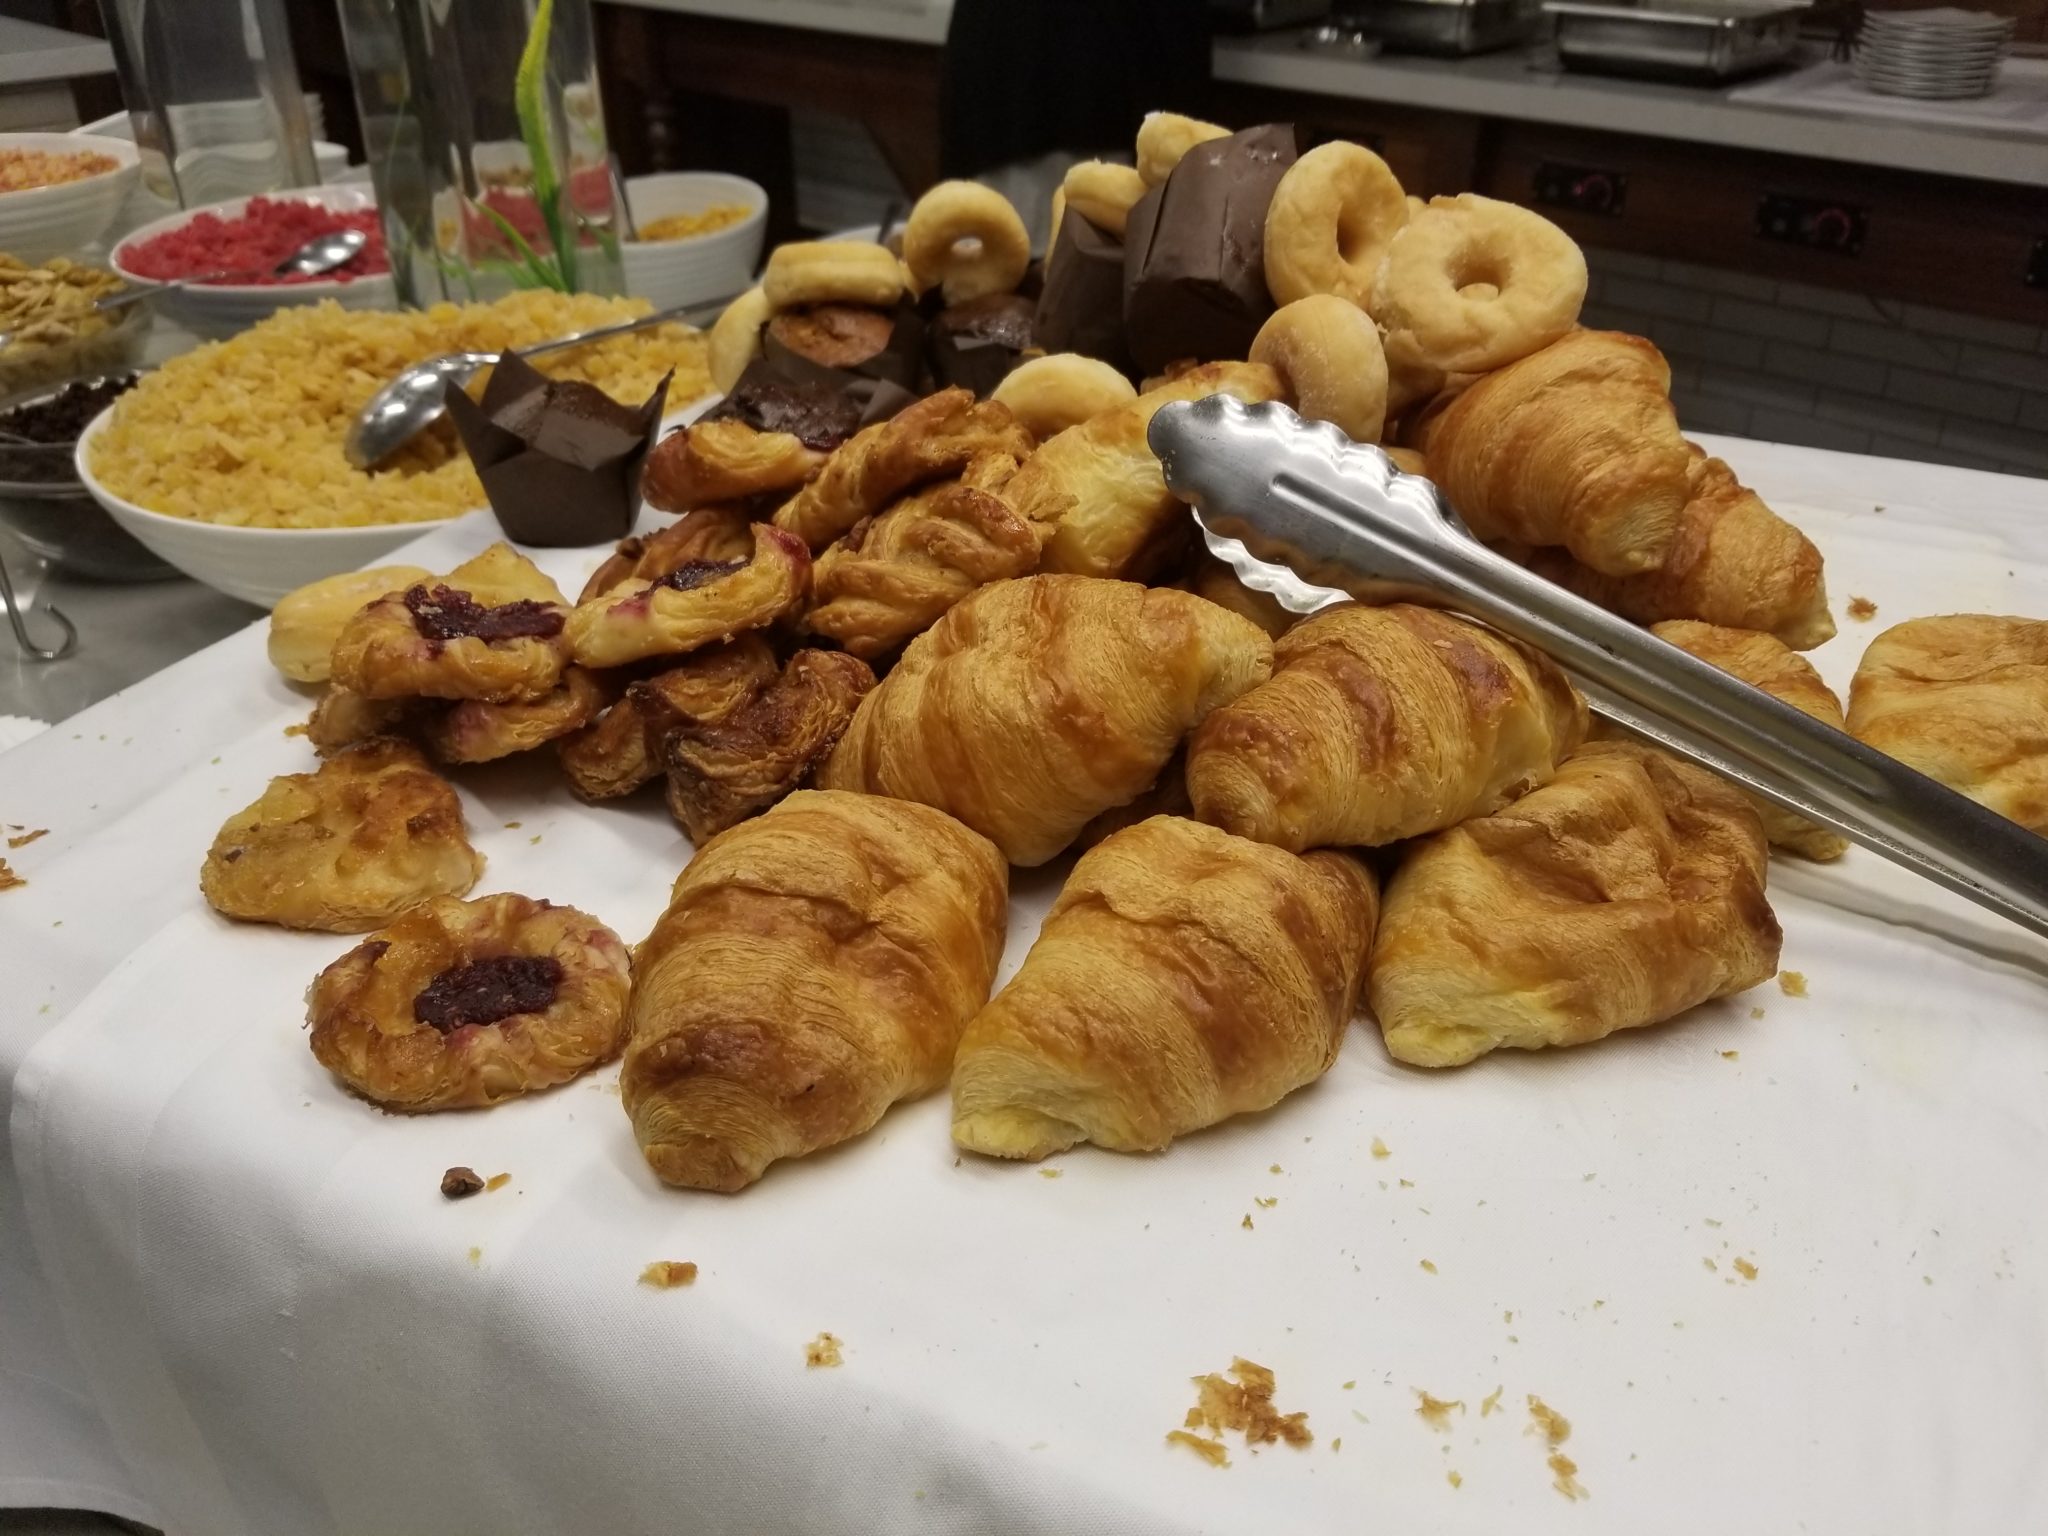 a table full of pastries and pastries